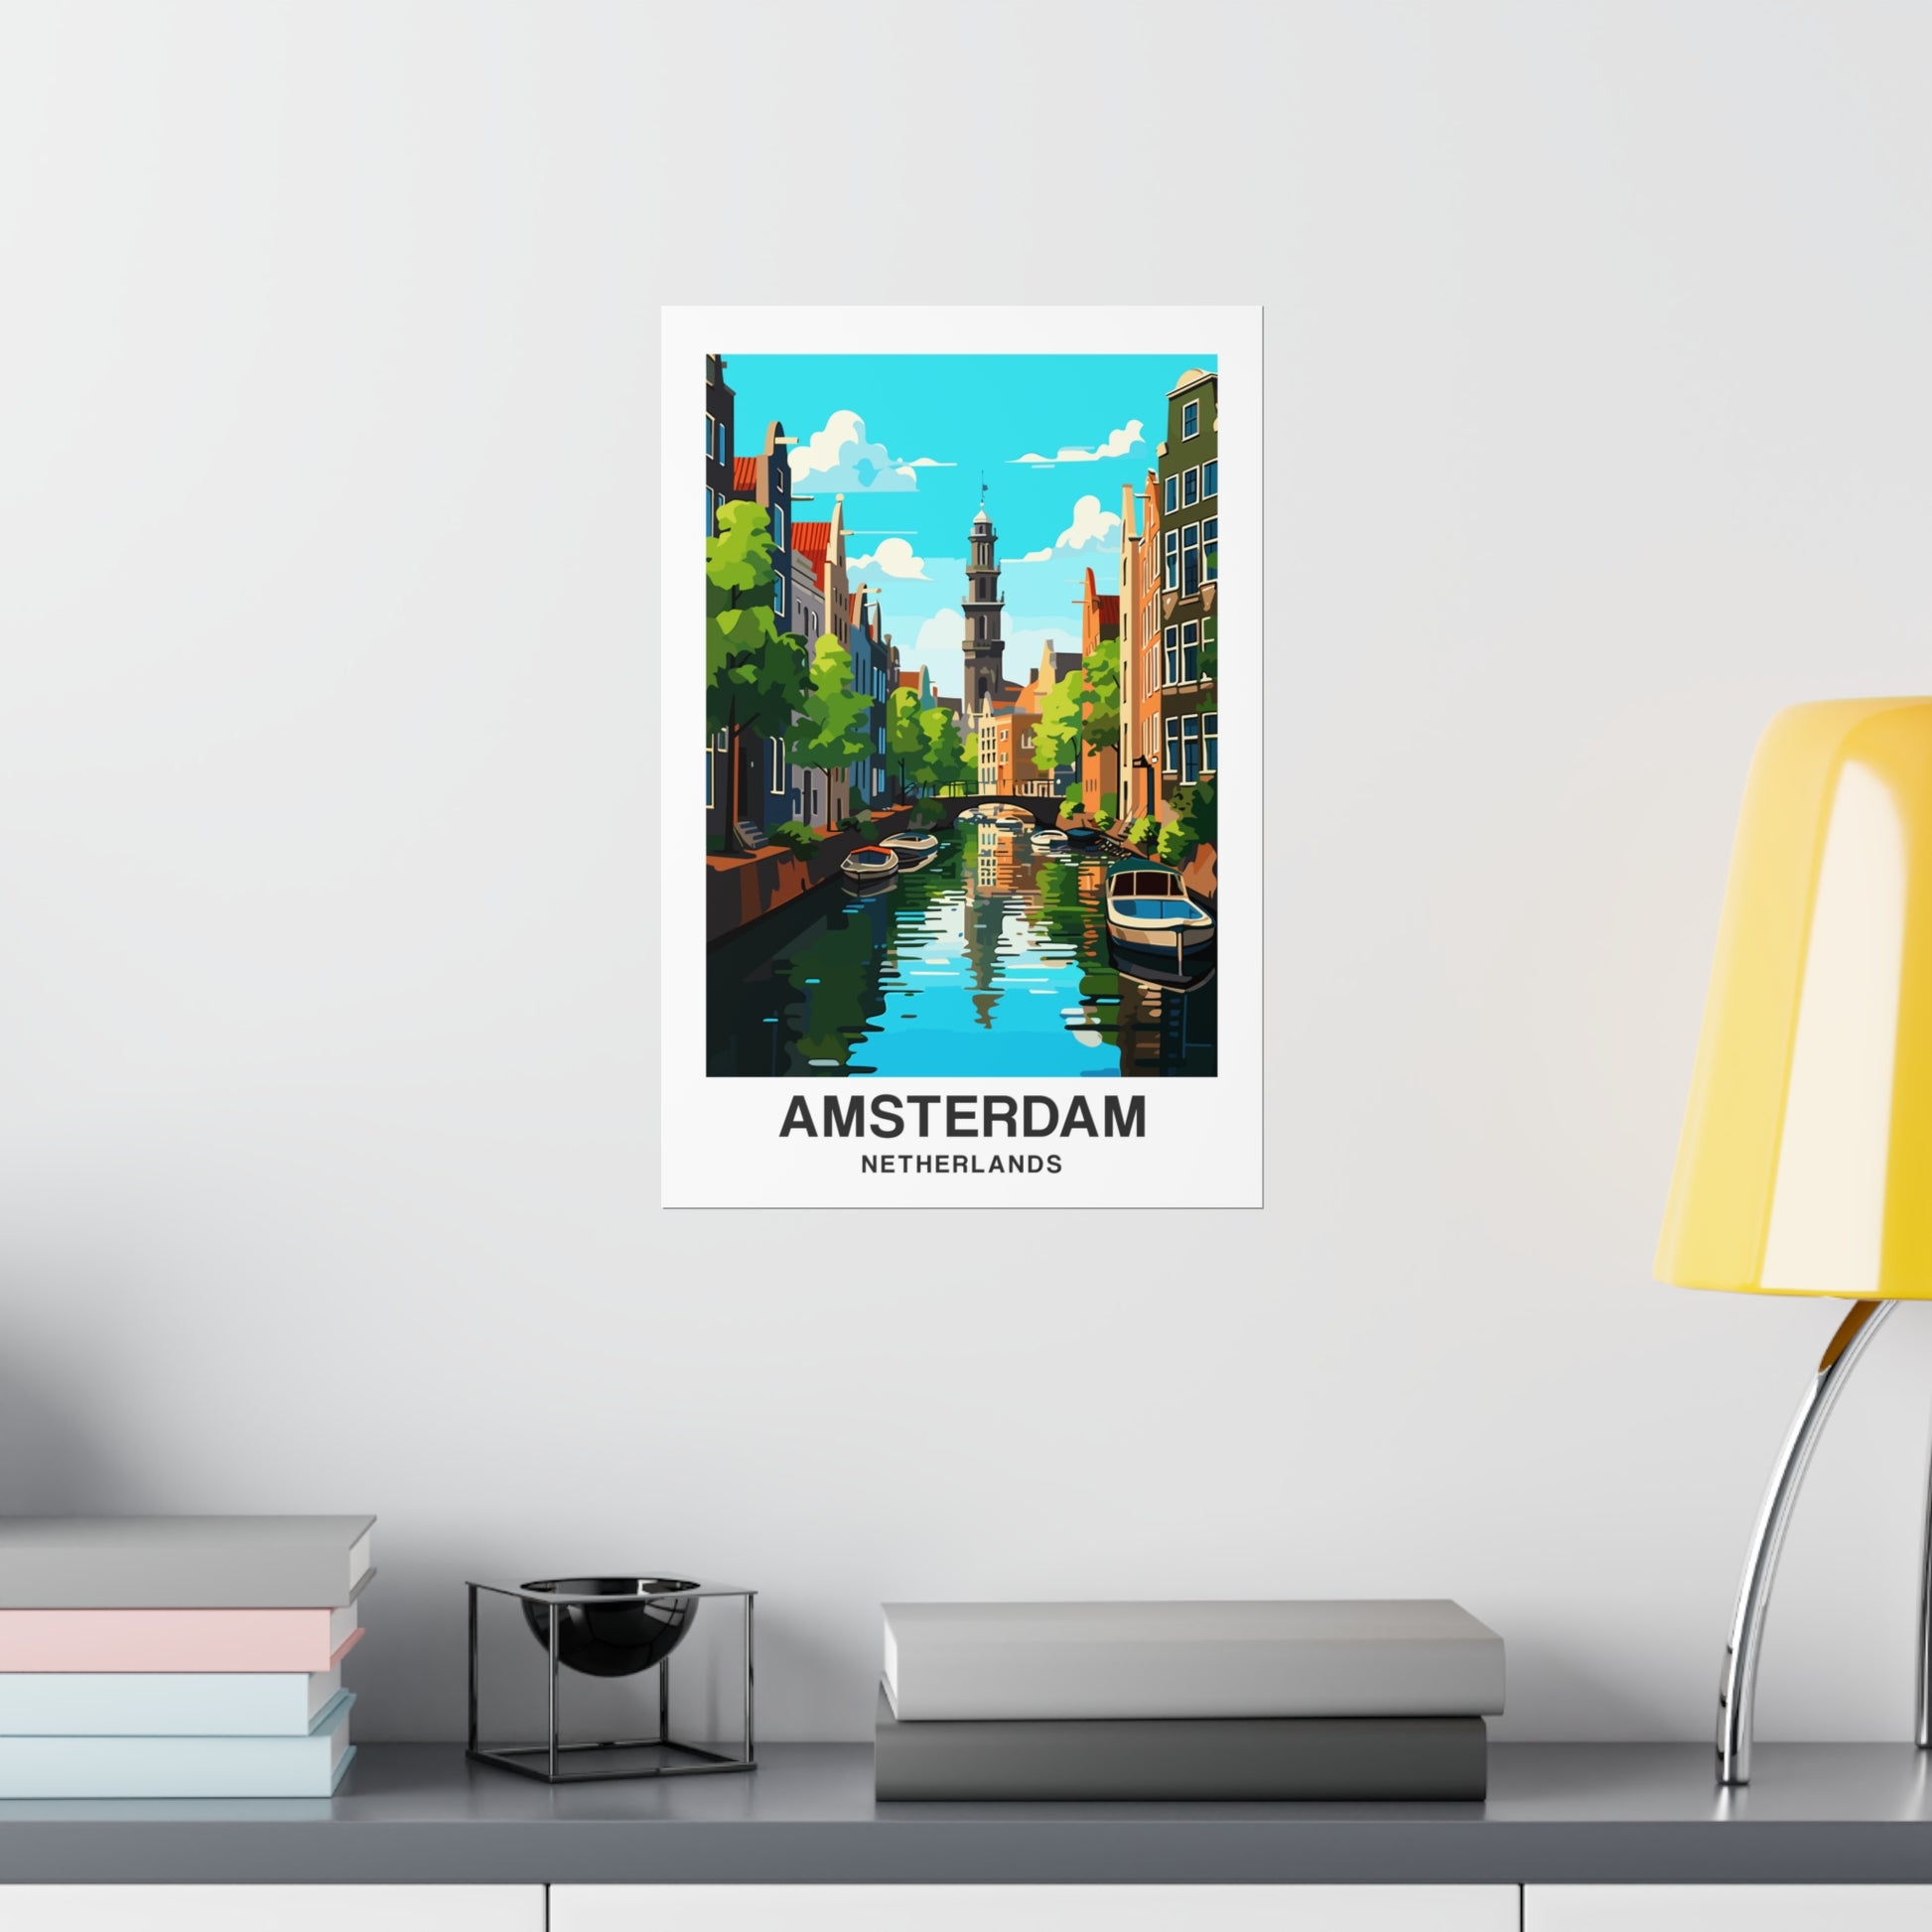 Amsterdam Canals Poster Print, Netherlands Picture Wall Image Art Vertical Travel Paper Artwork Small Large Room Office Decor Starcove Fashion